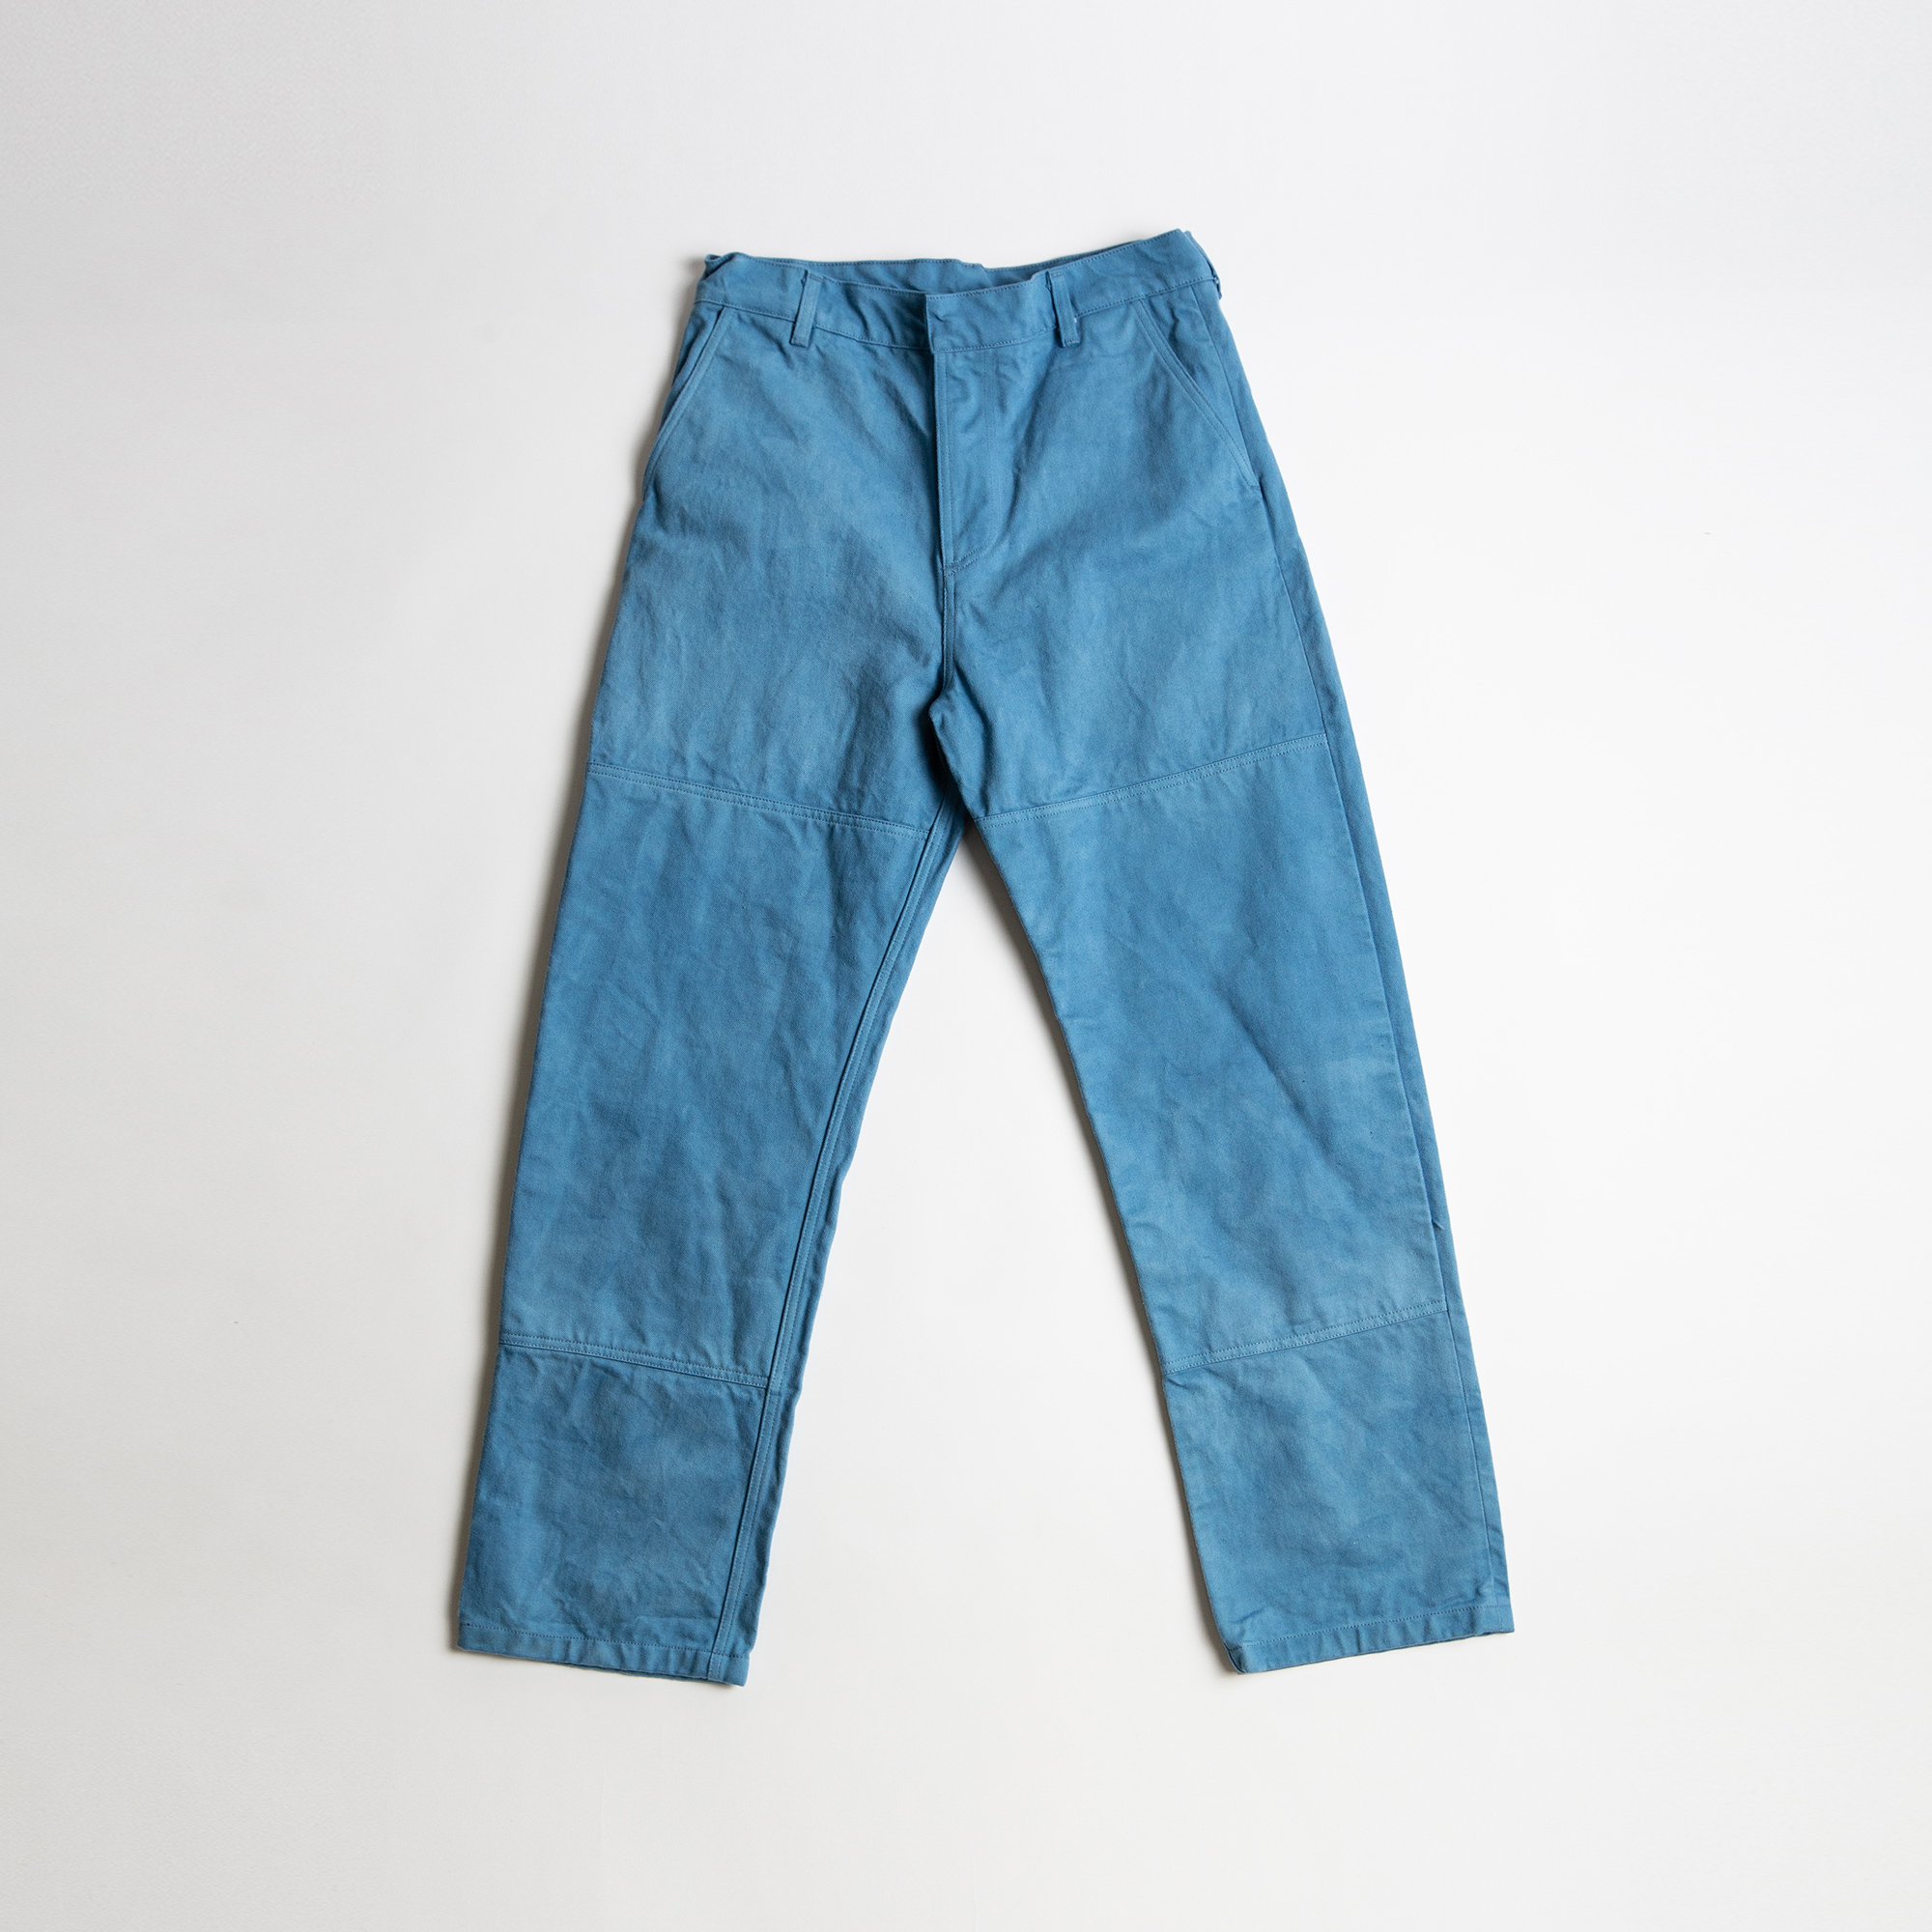 4 POCKET in Ice woad color by Arpenteur